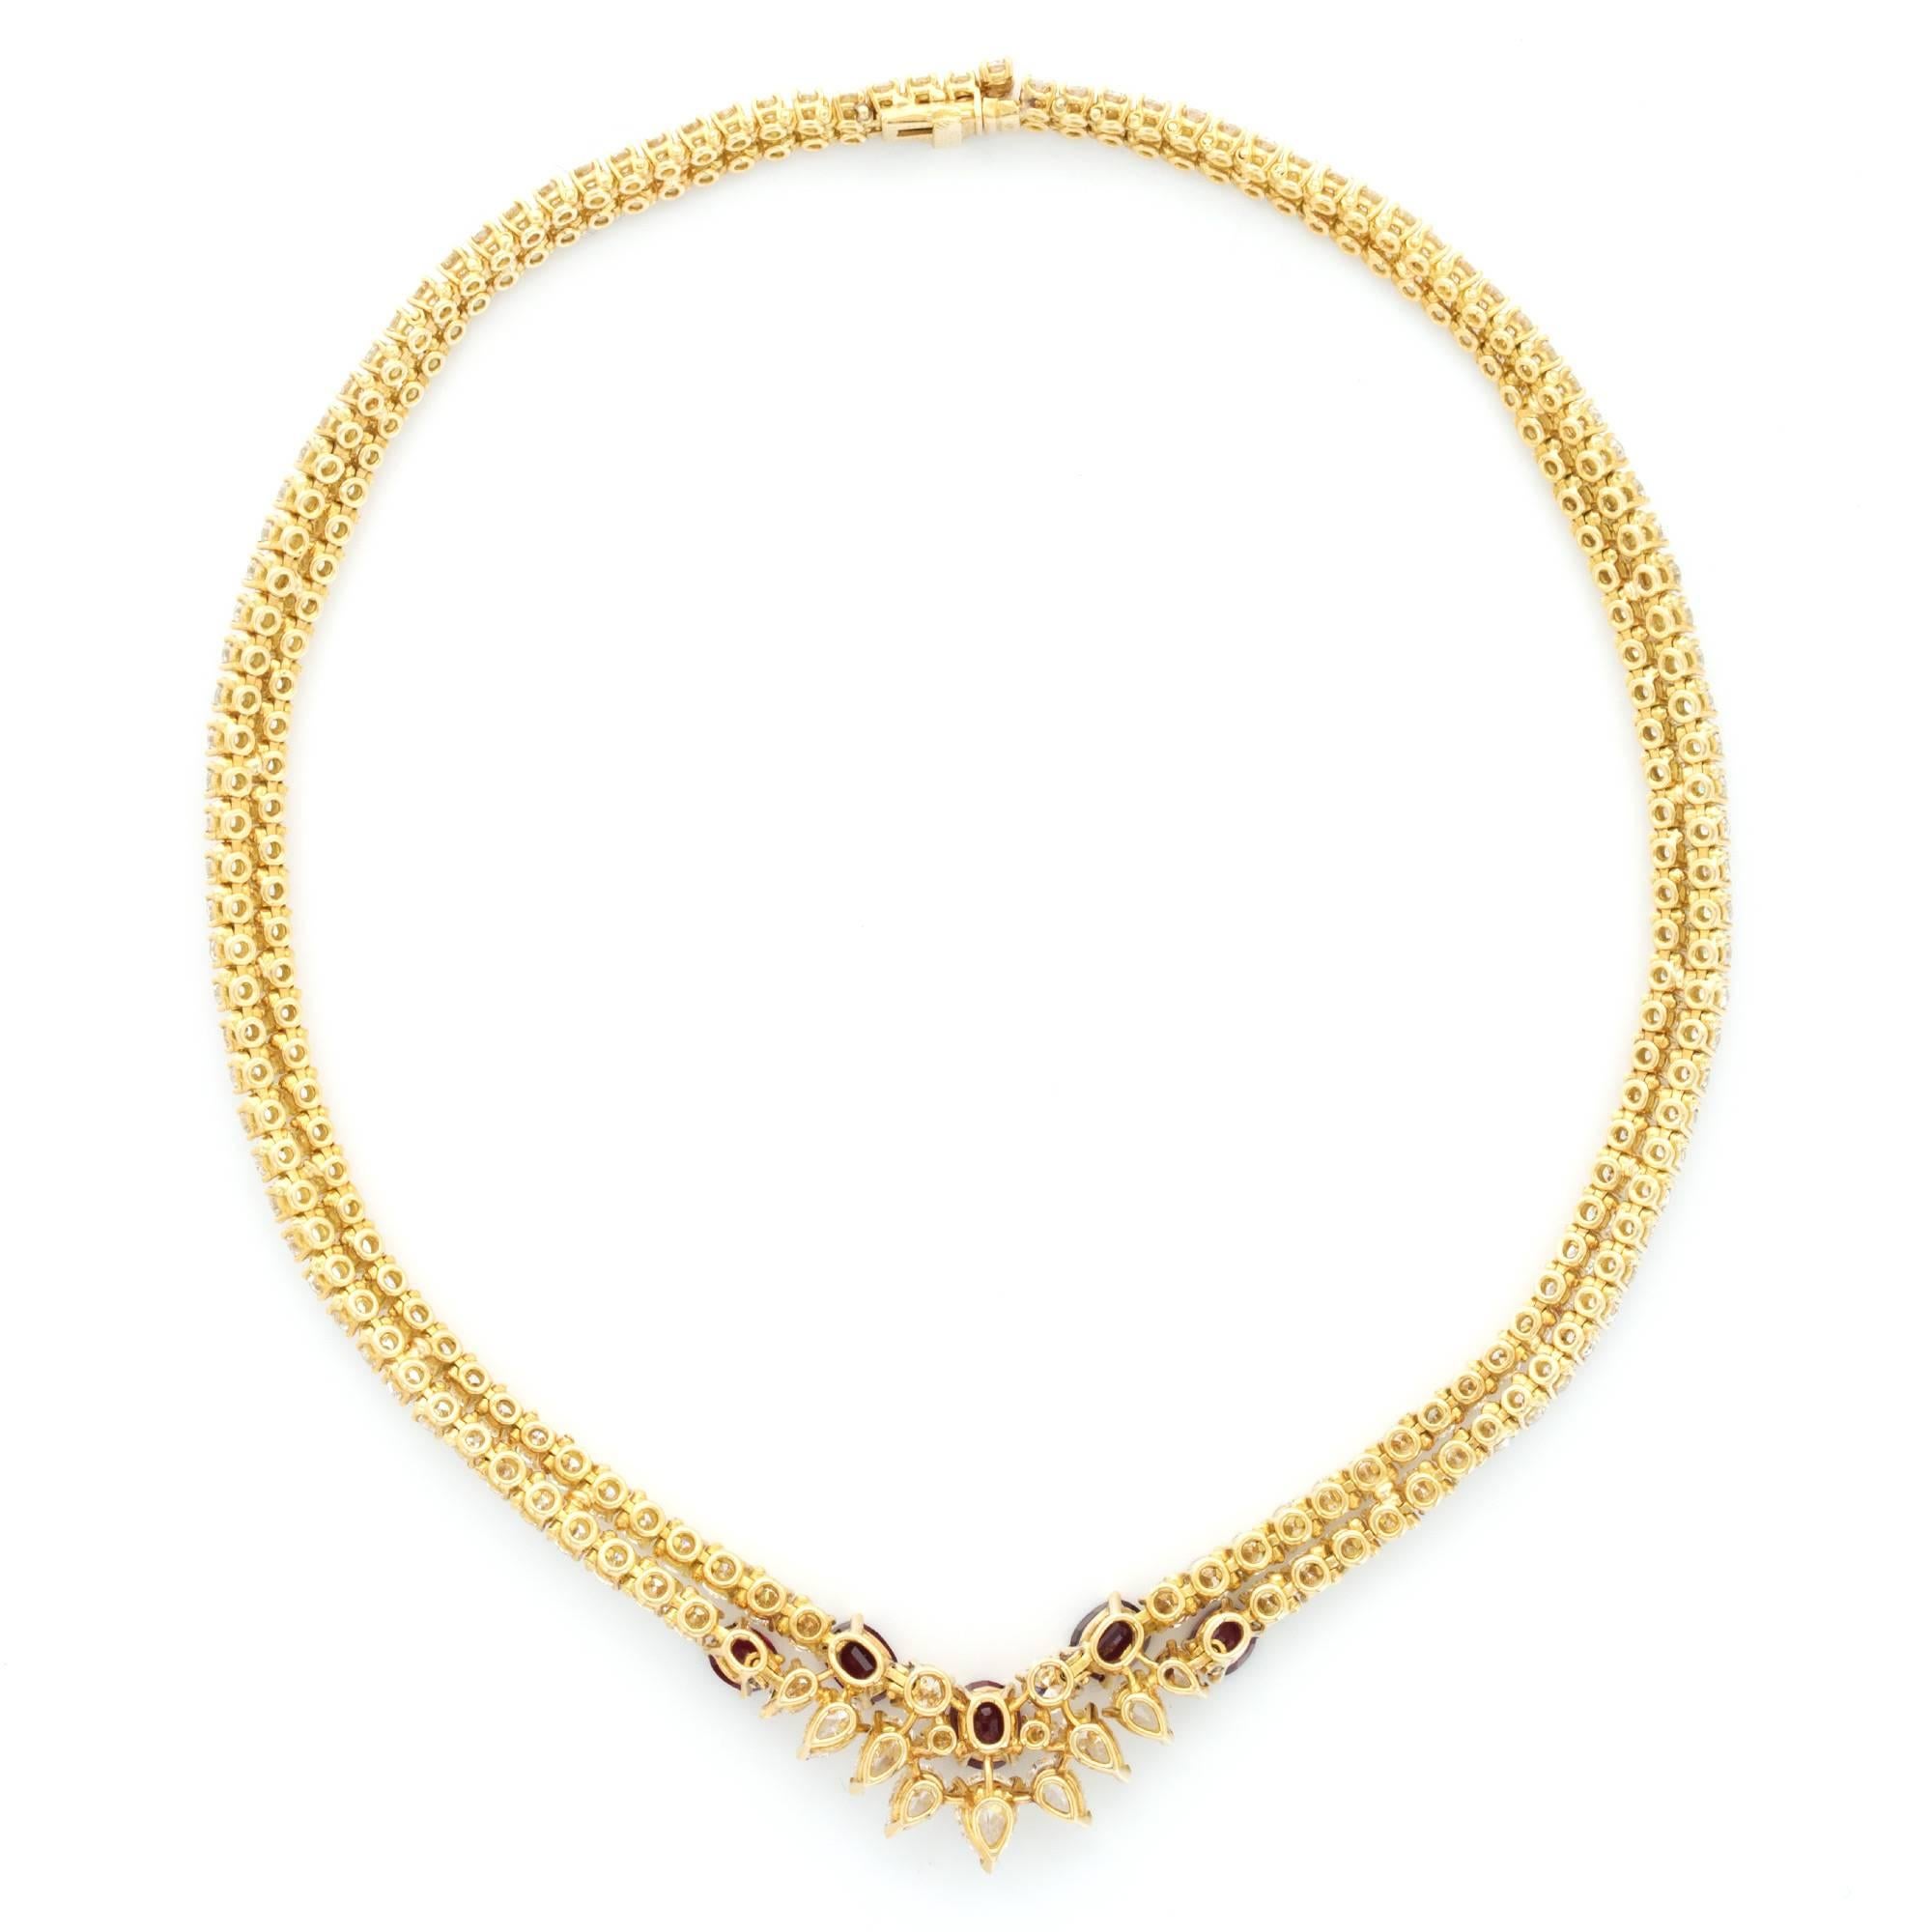 A Gorgeous 18k Yellow Gold Diamond & Ruby Necklace by Van Cleef & Arpels. 22.58cts of Diamonds. 4.80cts of Rubies. Signed "VCA and Numbered". Made in France. 